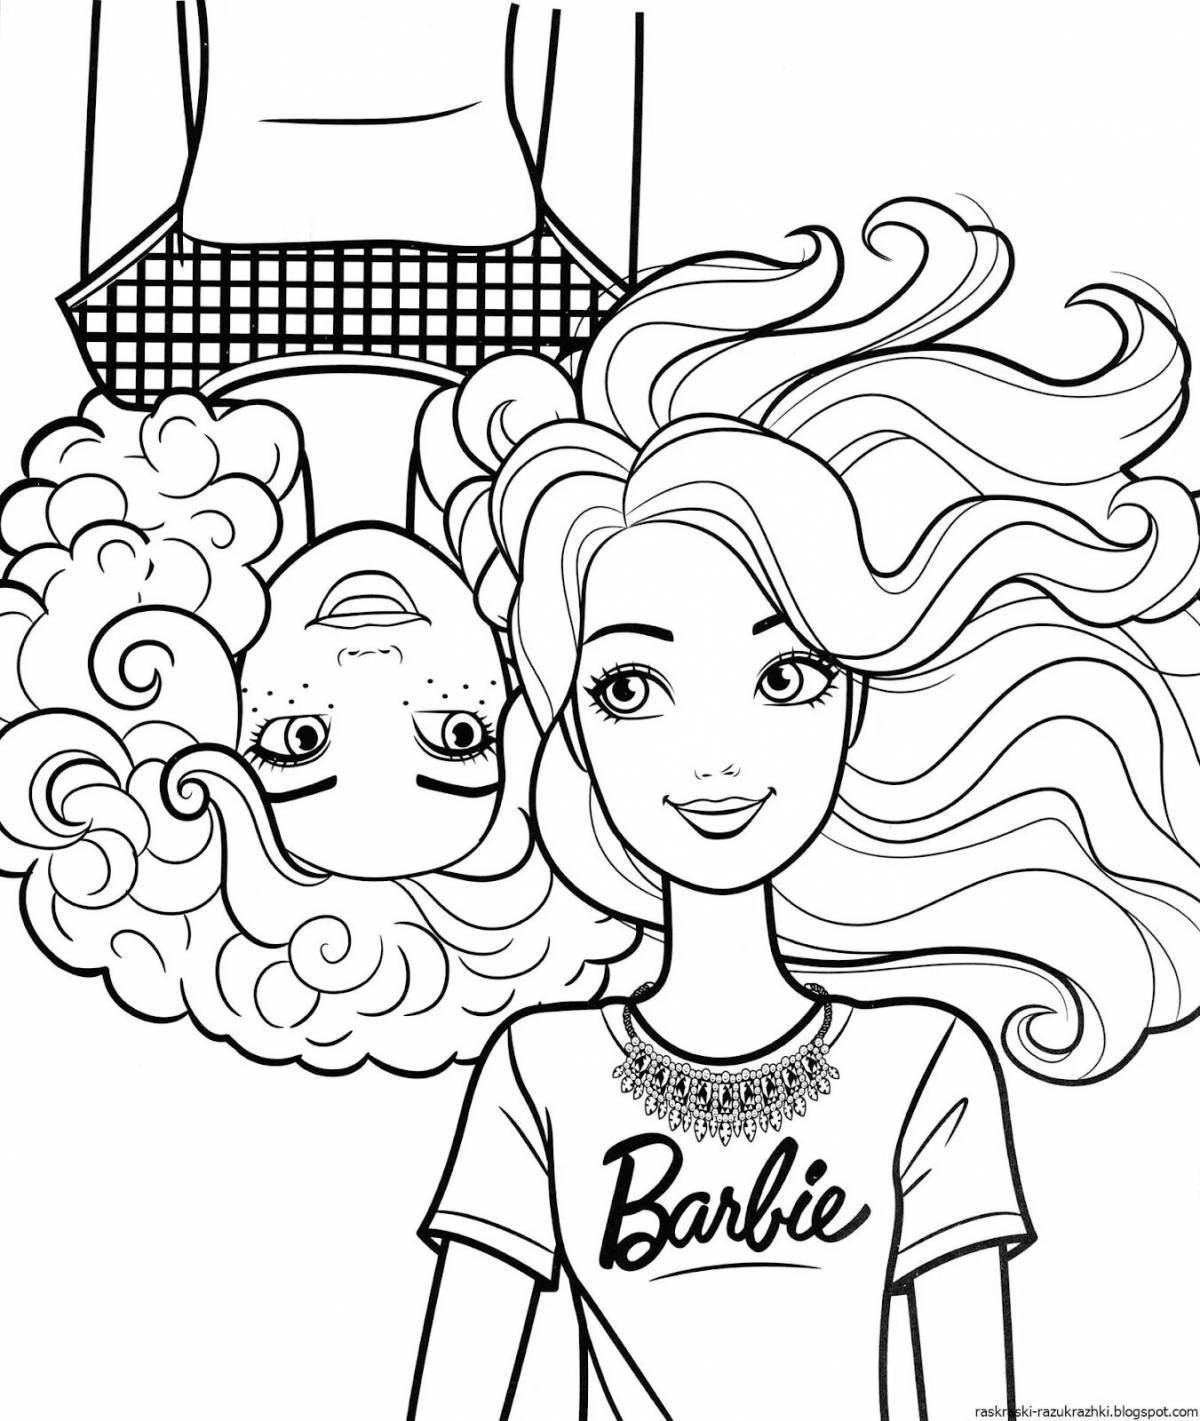 Cute coloring pages for girls, girlfriends